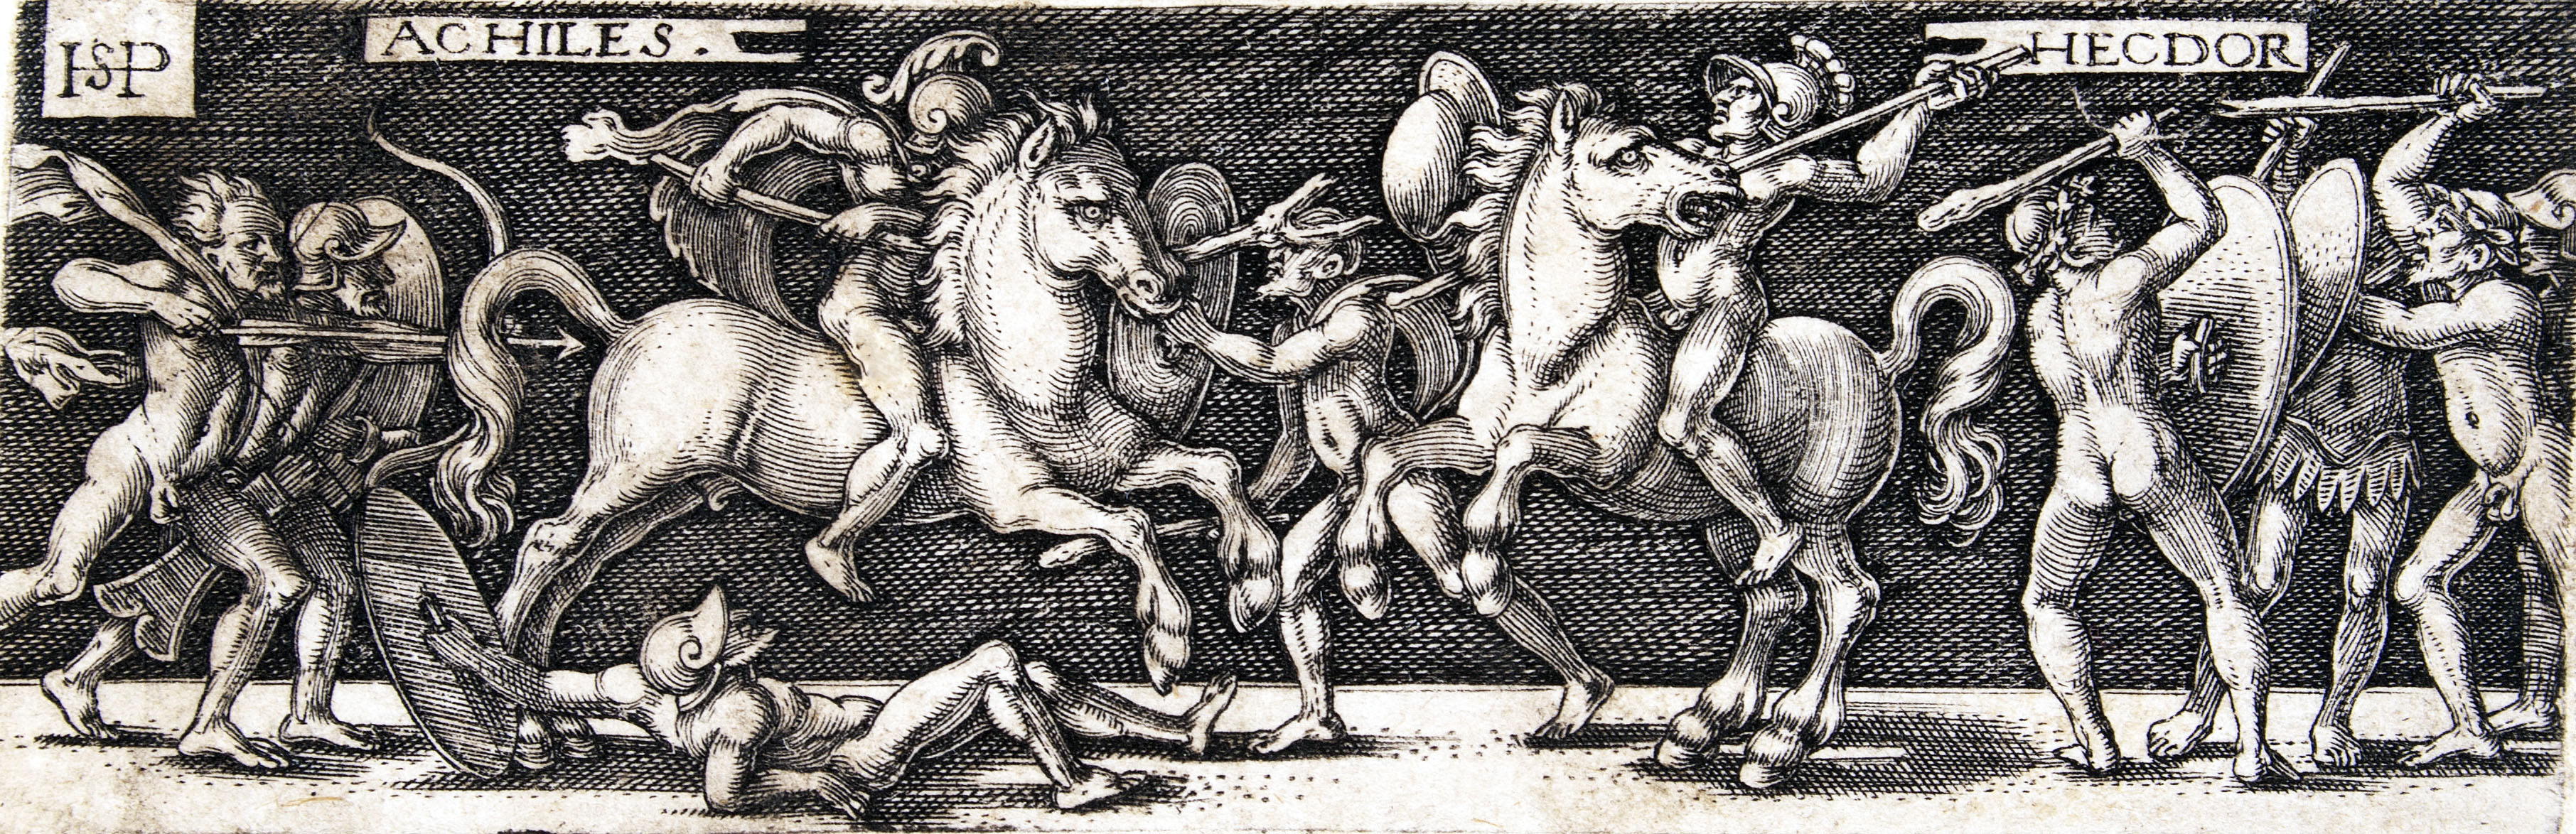 Image 2 Hans Sebold Beham Achilles and Hector Engraving on laid paper 1510-30